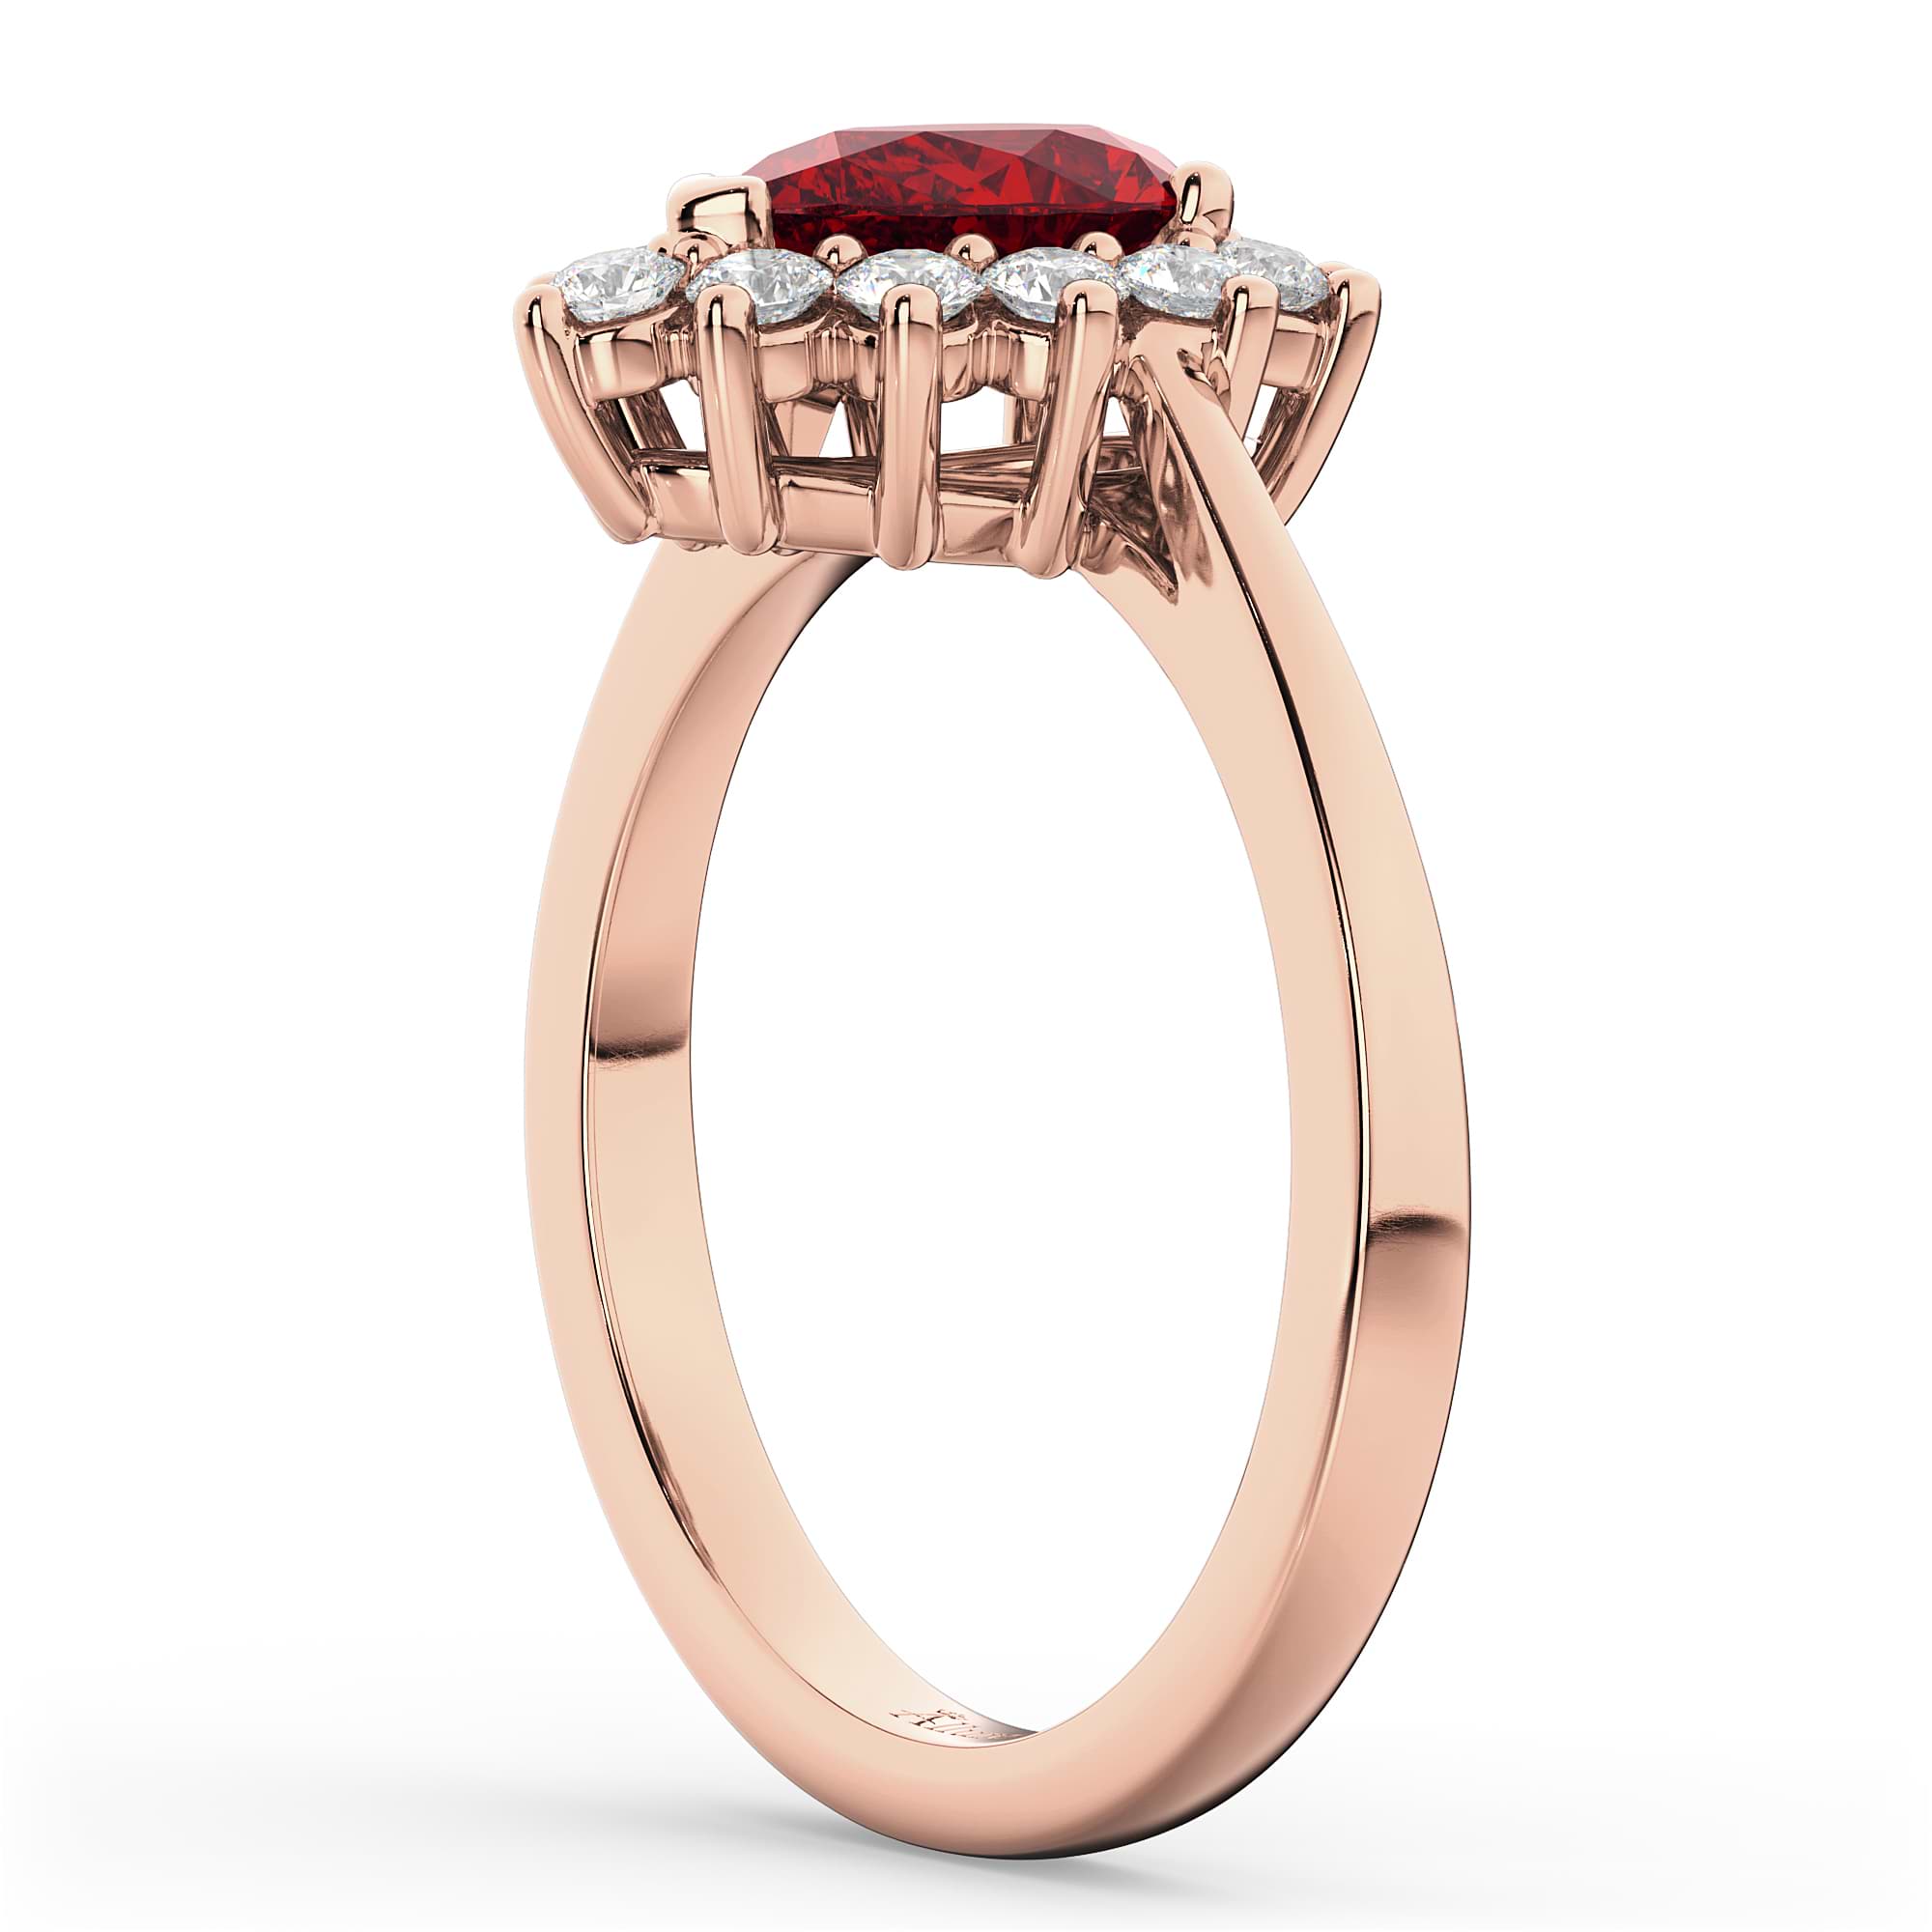 Halo Ruby & Diamond Floral Pear Shaped Fashion Ring 14k Rose Gold (1.27ct)